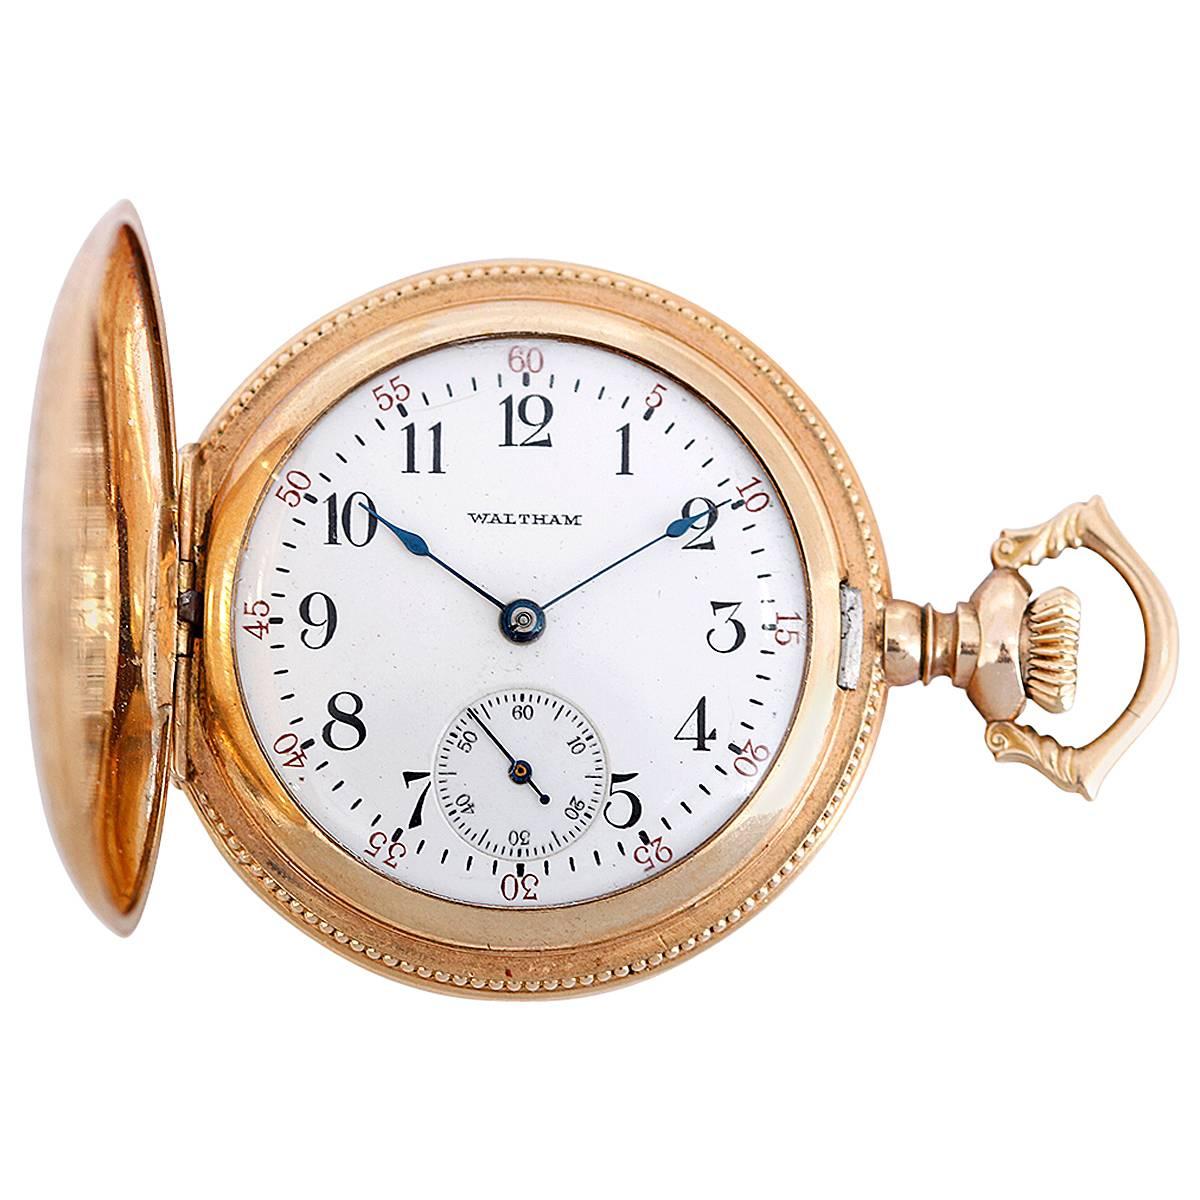 Waltham Lady's Ornately Engraved Gold Plated Hunting Case Pocket Pendant Watch